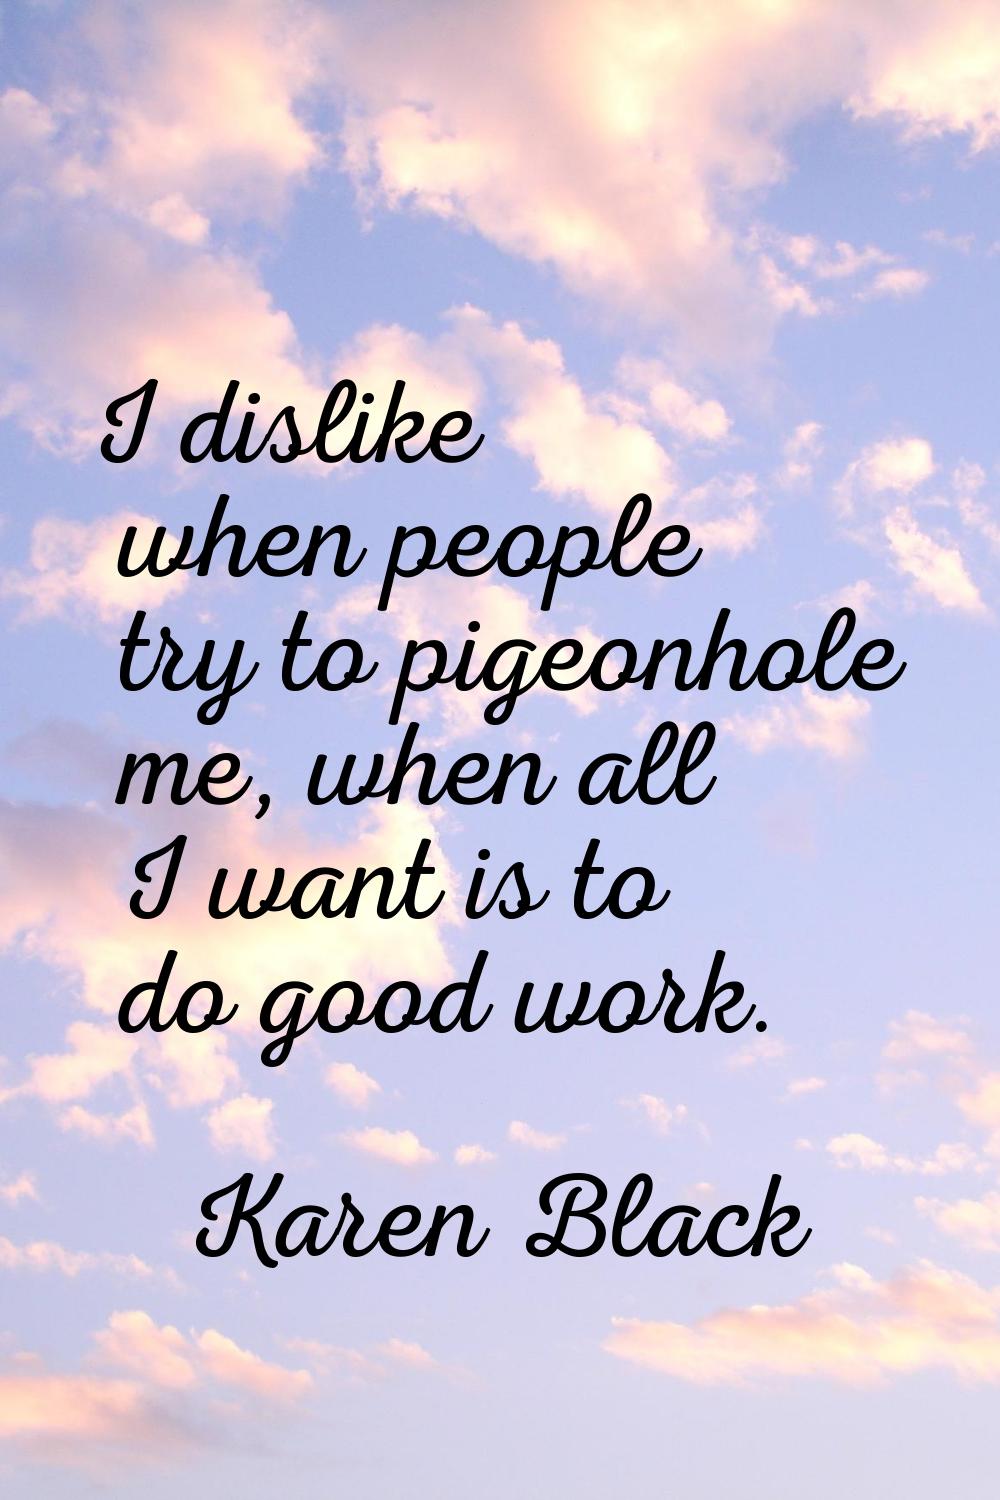 I dislike when people try to pigeonhole me, when all I want is to do good work.